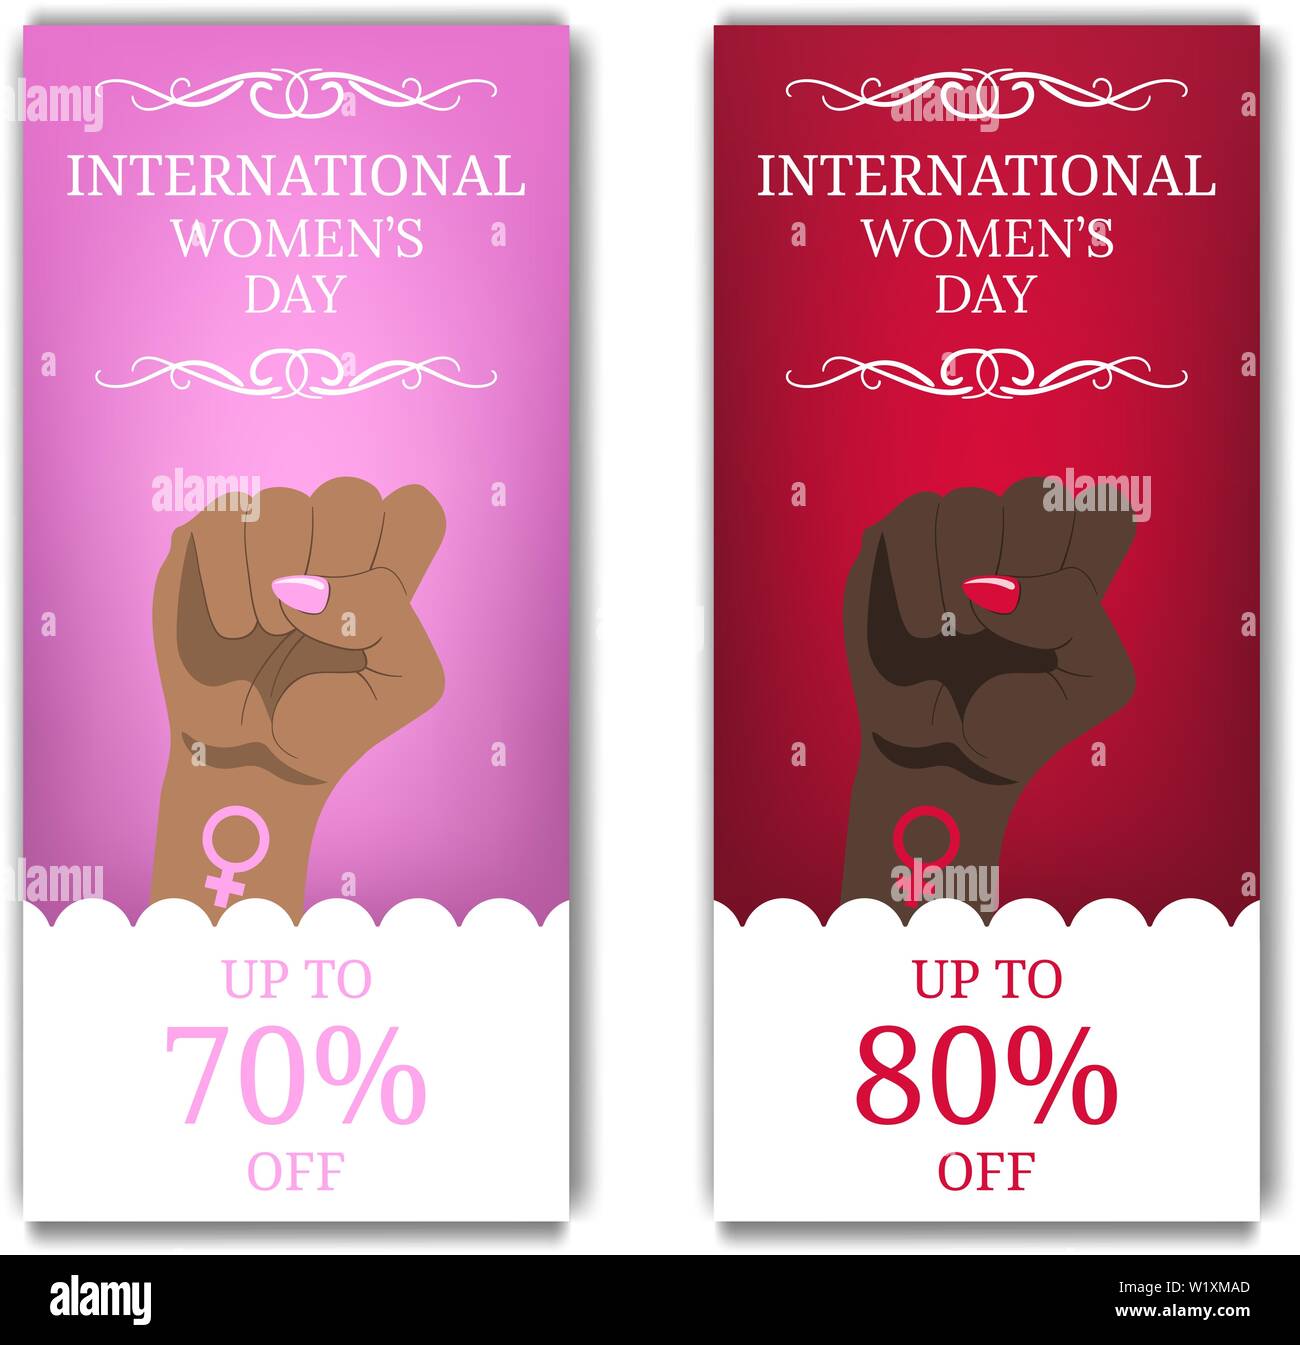 International Women's Day Discount, Flyer, Brochure. Women's March. Multinational Equality. Female hand with her fist raised up. Girl Power. Feminism Stock Vector